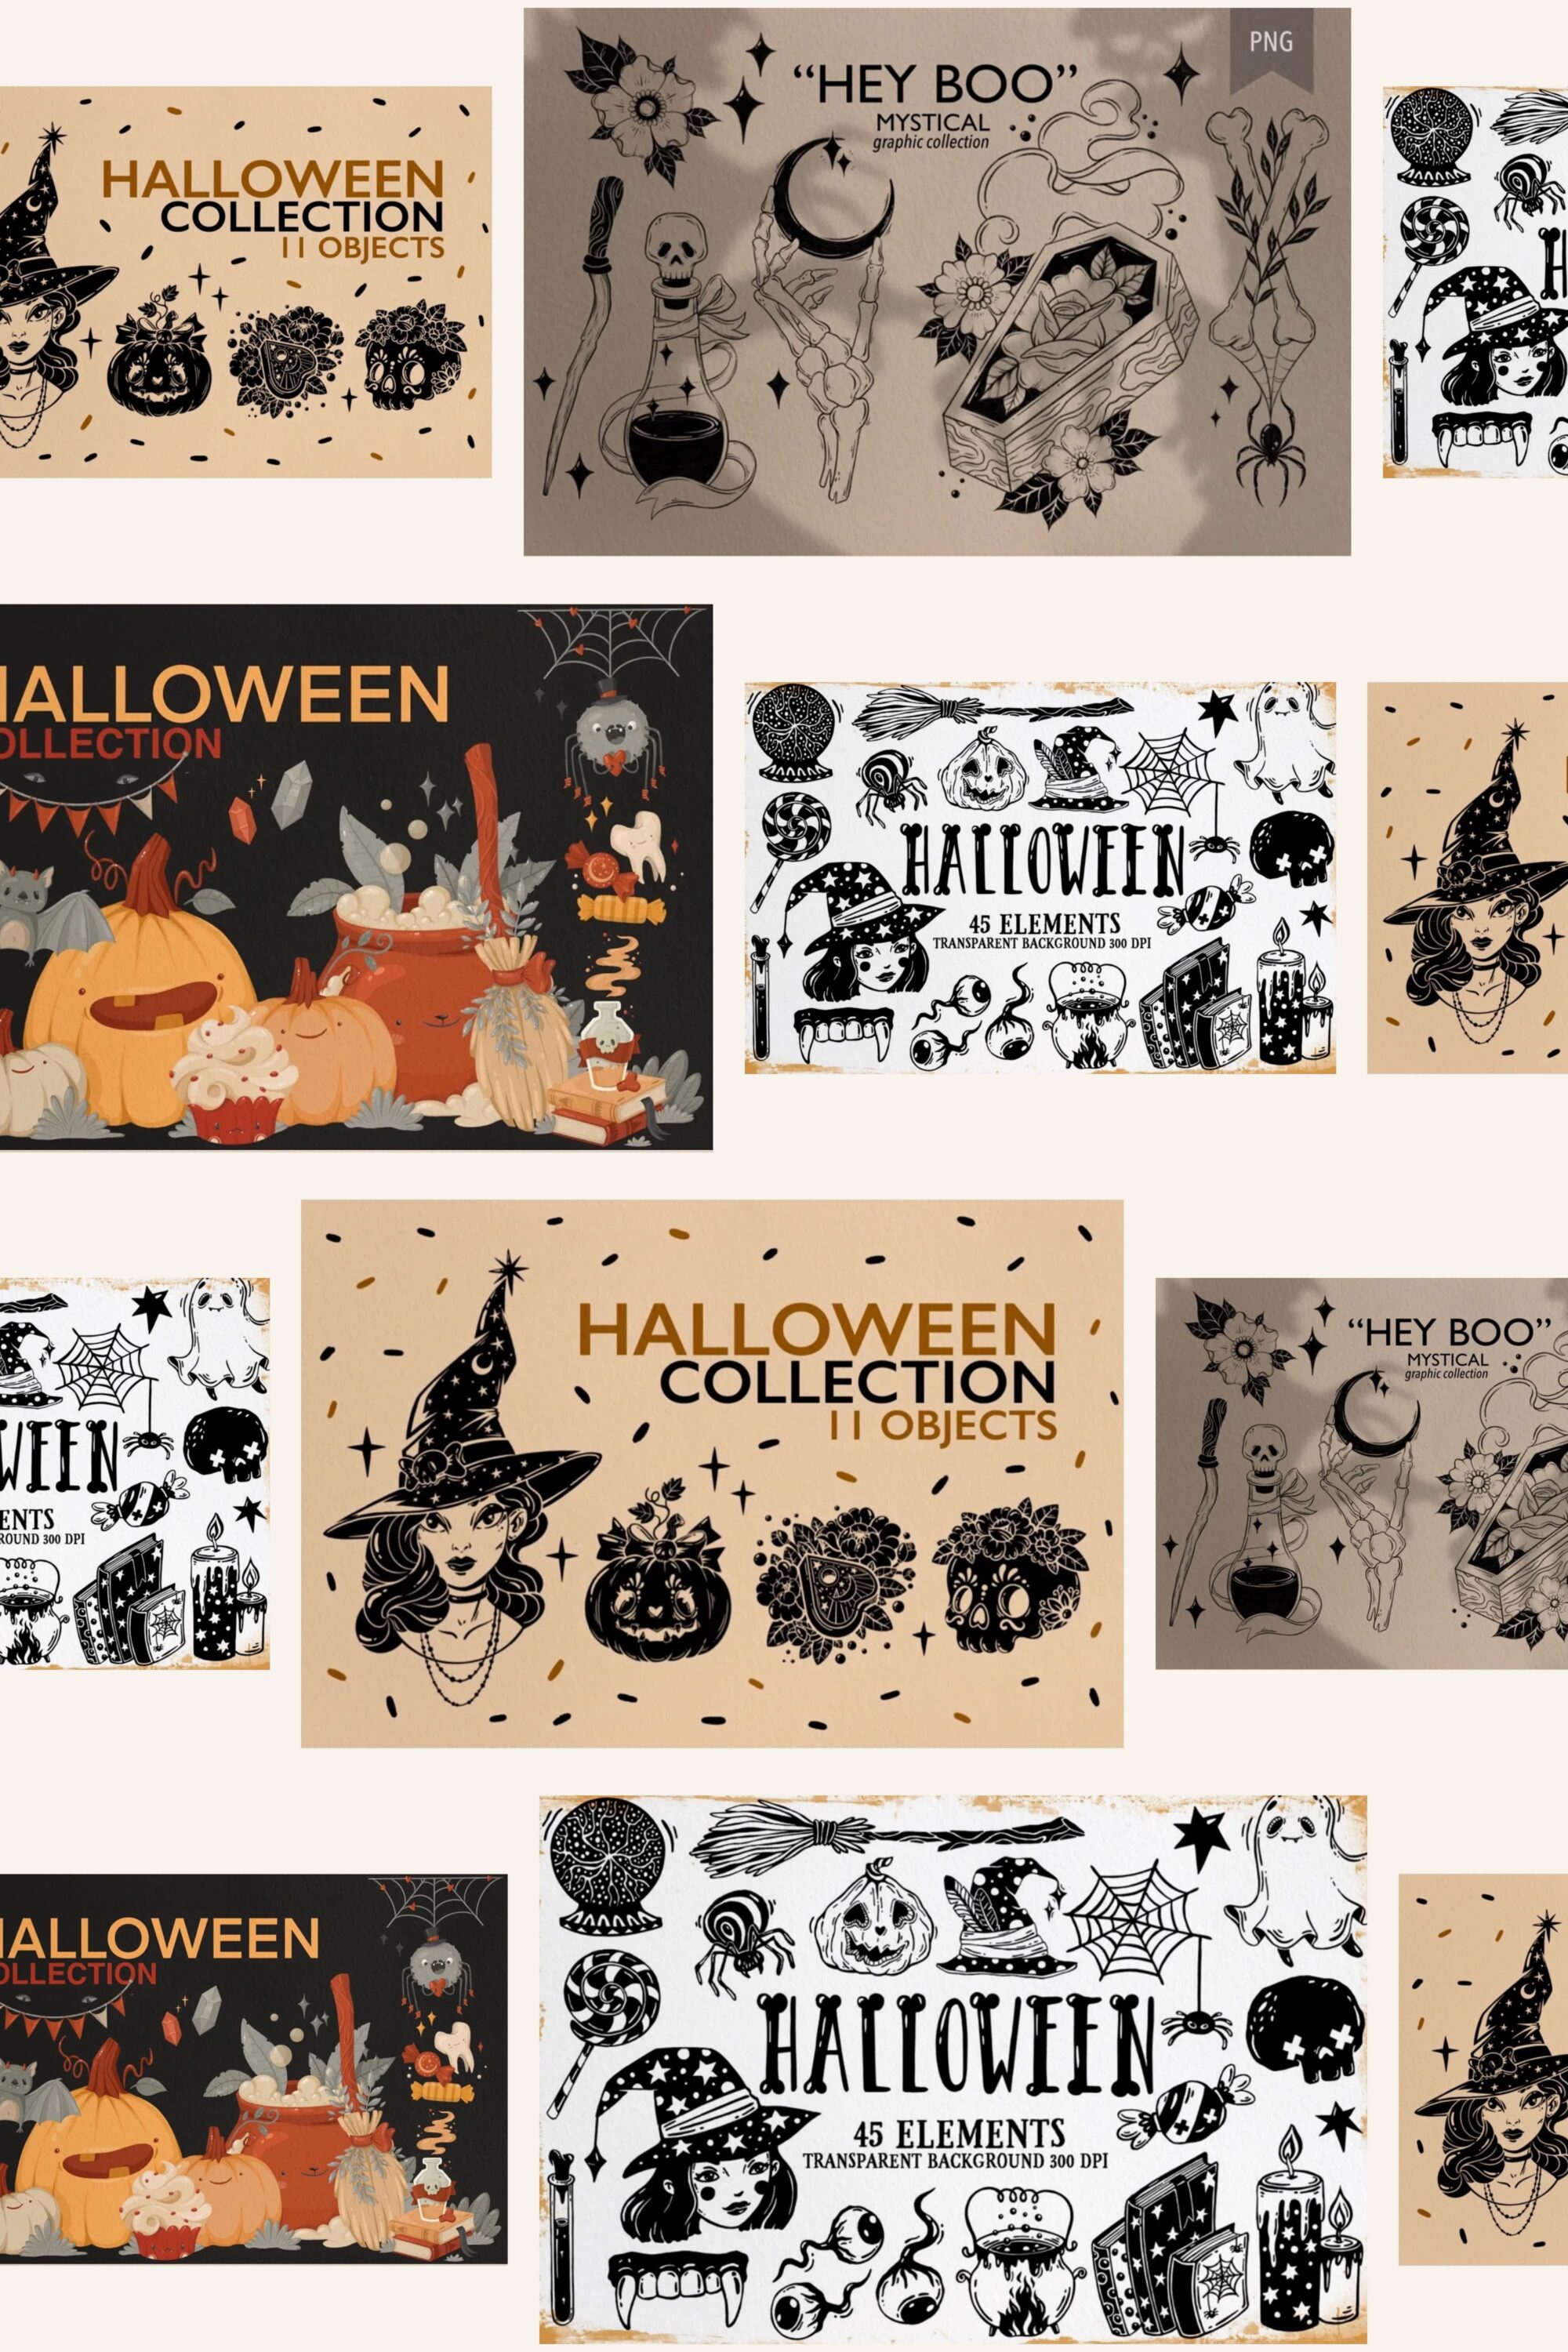 Black Halloween illustrations for happy holiday.